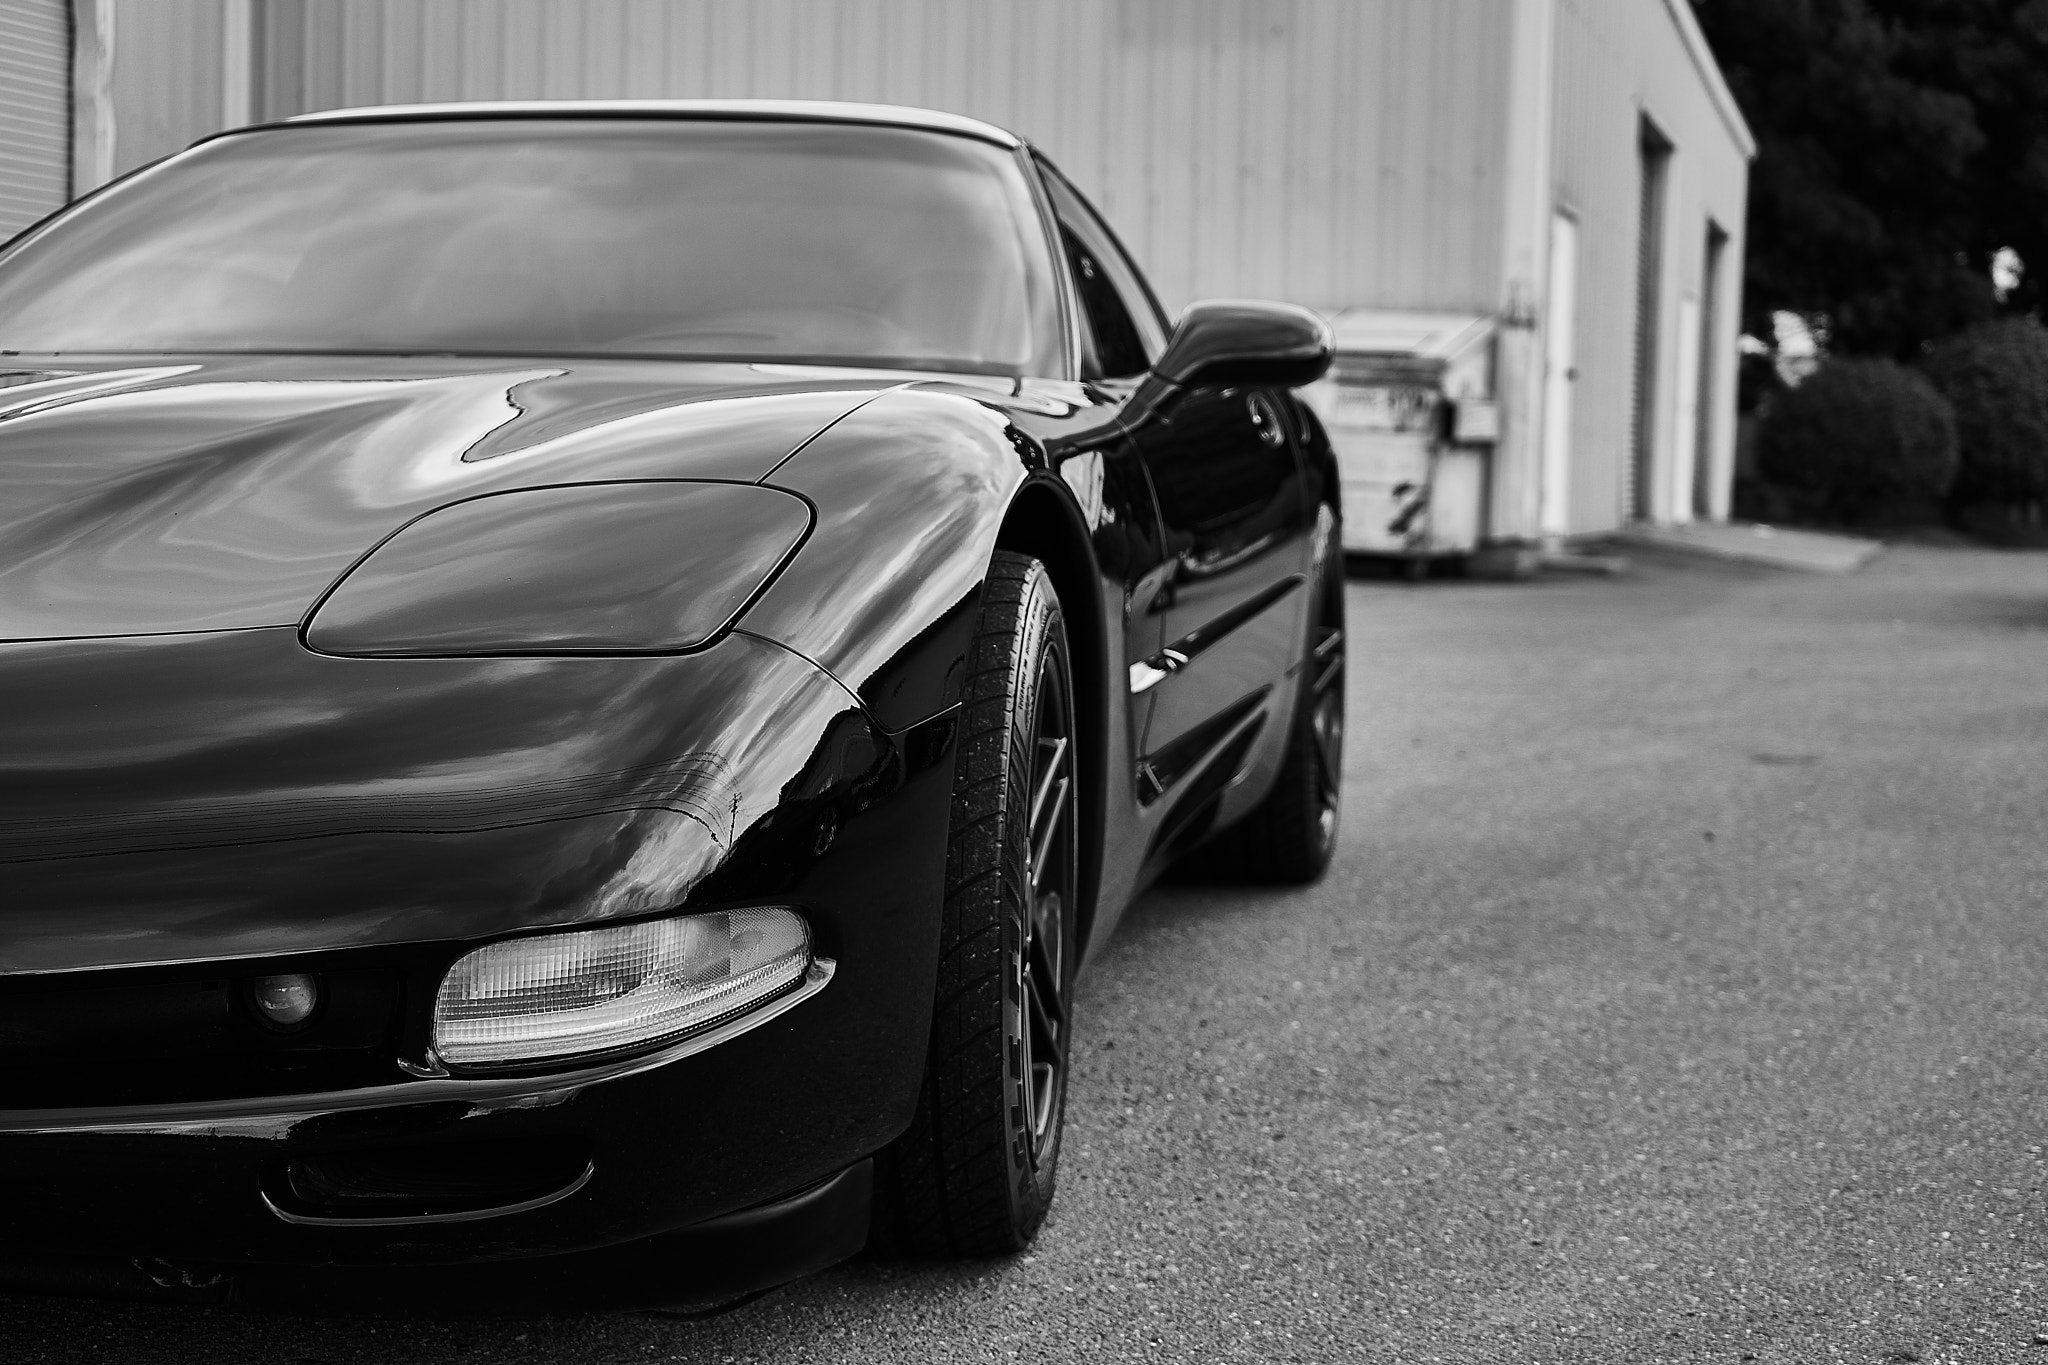 Sony a7 II + Sony FE 28-70mm F3.5-5.6 OSS sample photo. Black c5 corvette in black and white photography